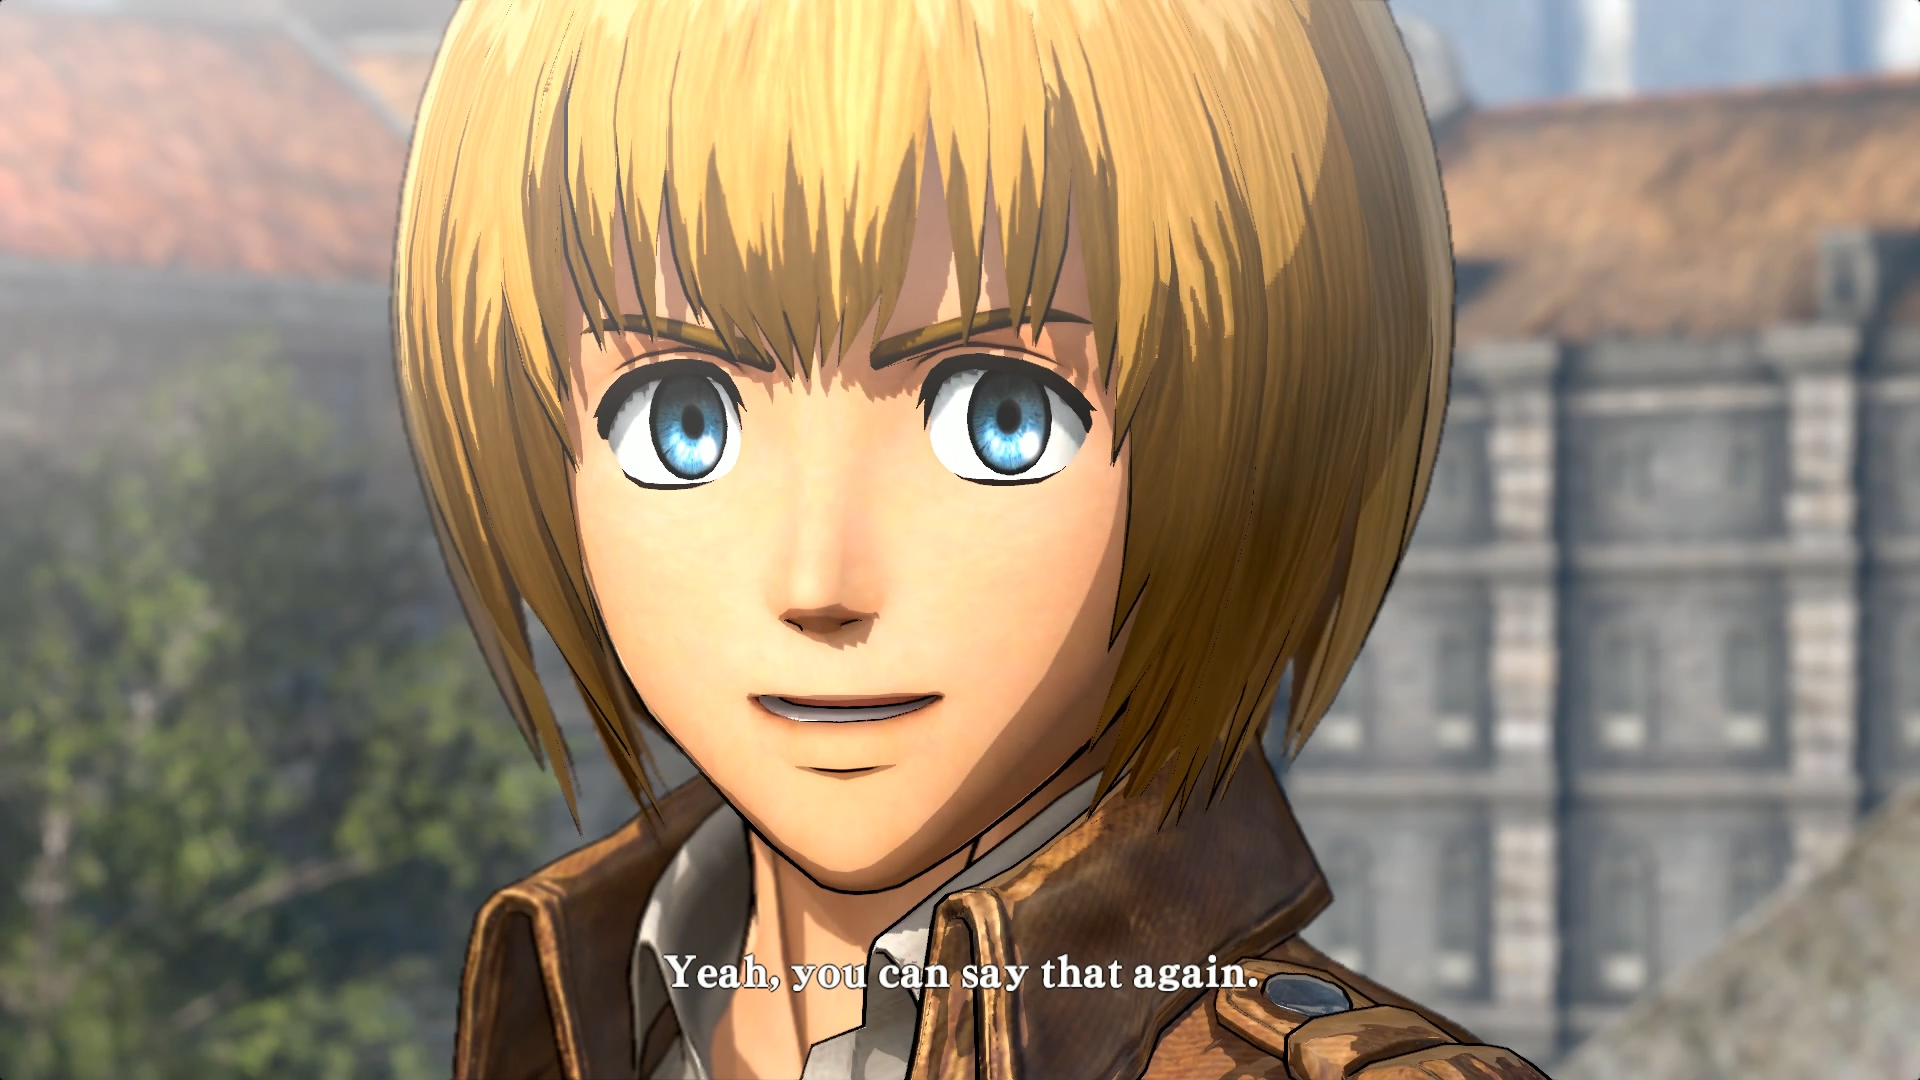 The Attack On Titan Game Has One Job, And It Does It Pretty Well